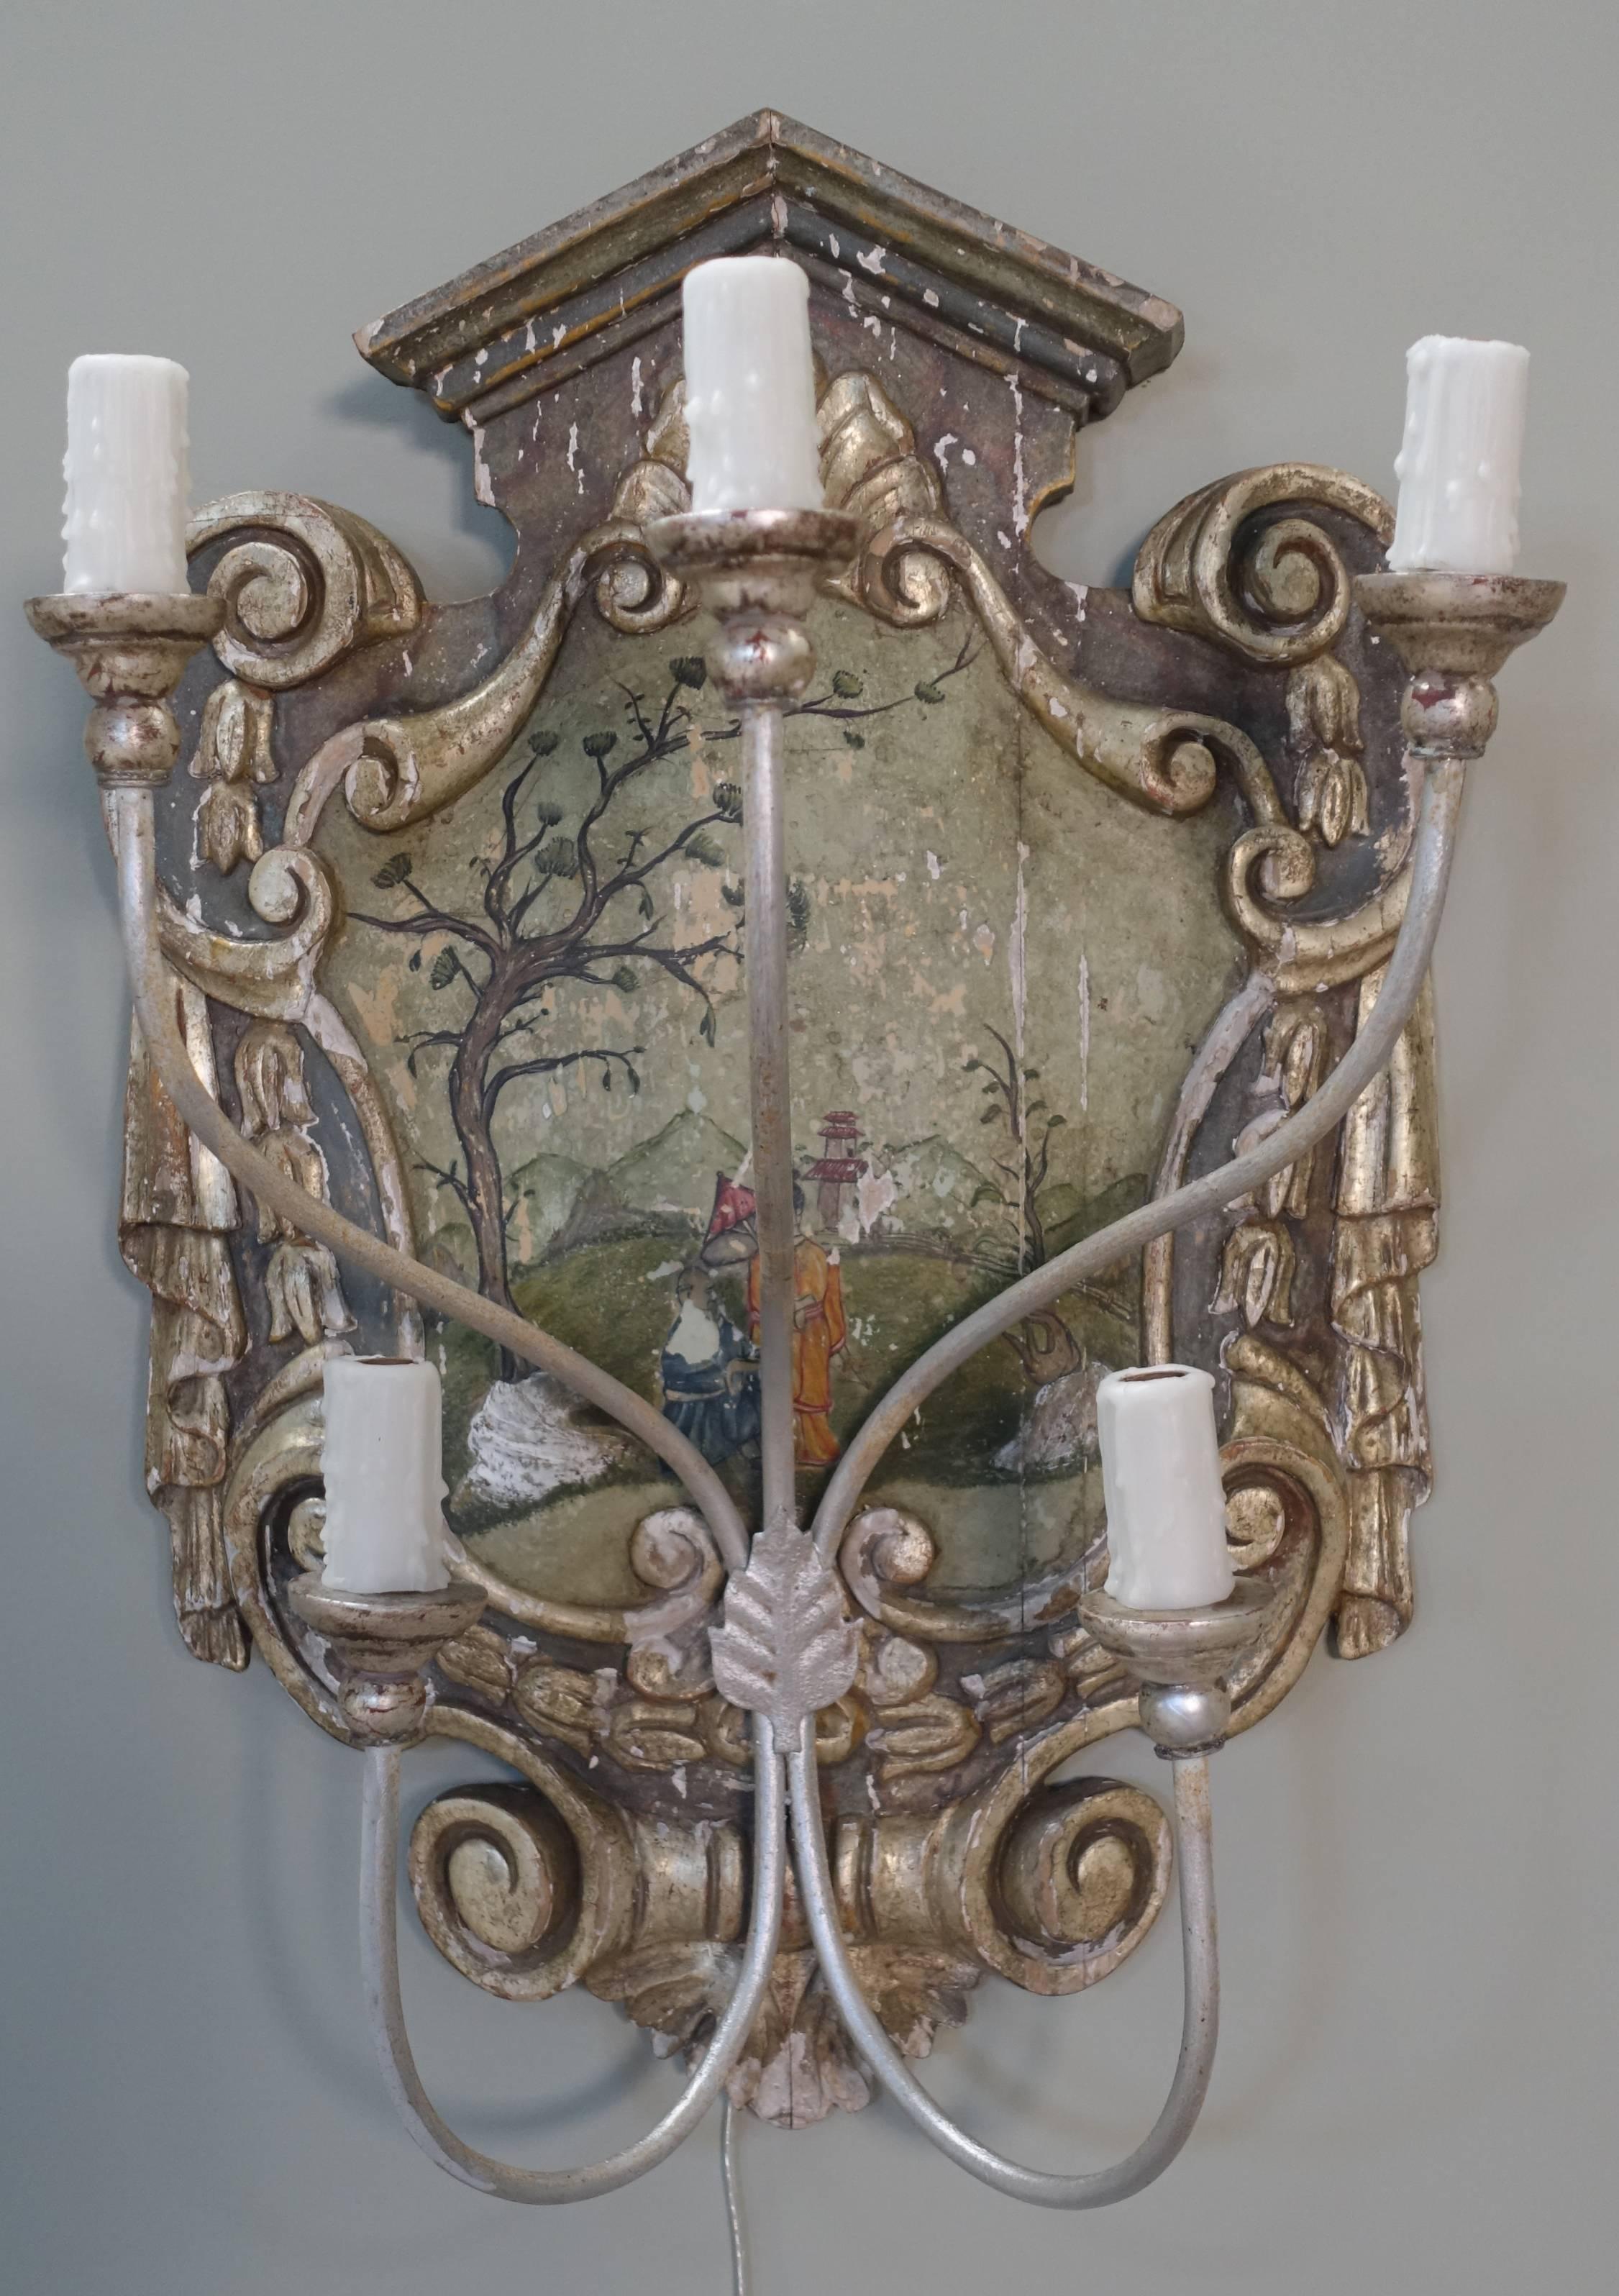 Pair of hand-painted pagoda shaped wood carved painted and parcel-gilt sconces with detailed chinoiserie design in center. The sconces are newly rewired with drip-wax candle covers. Silver giltwood bobeches and silver gilt metal arms.